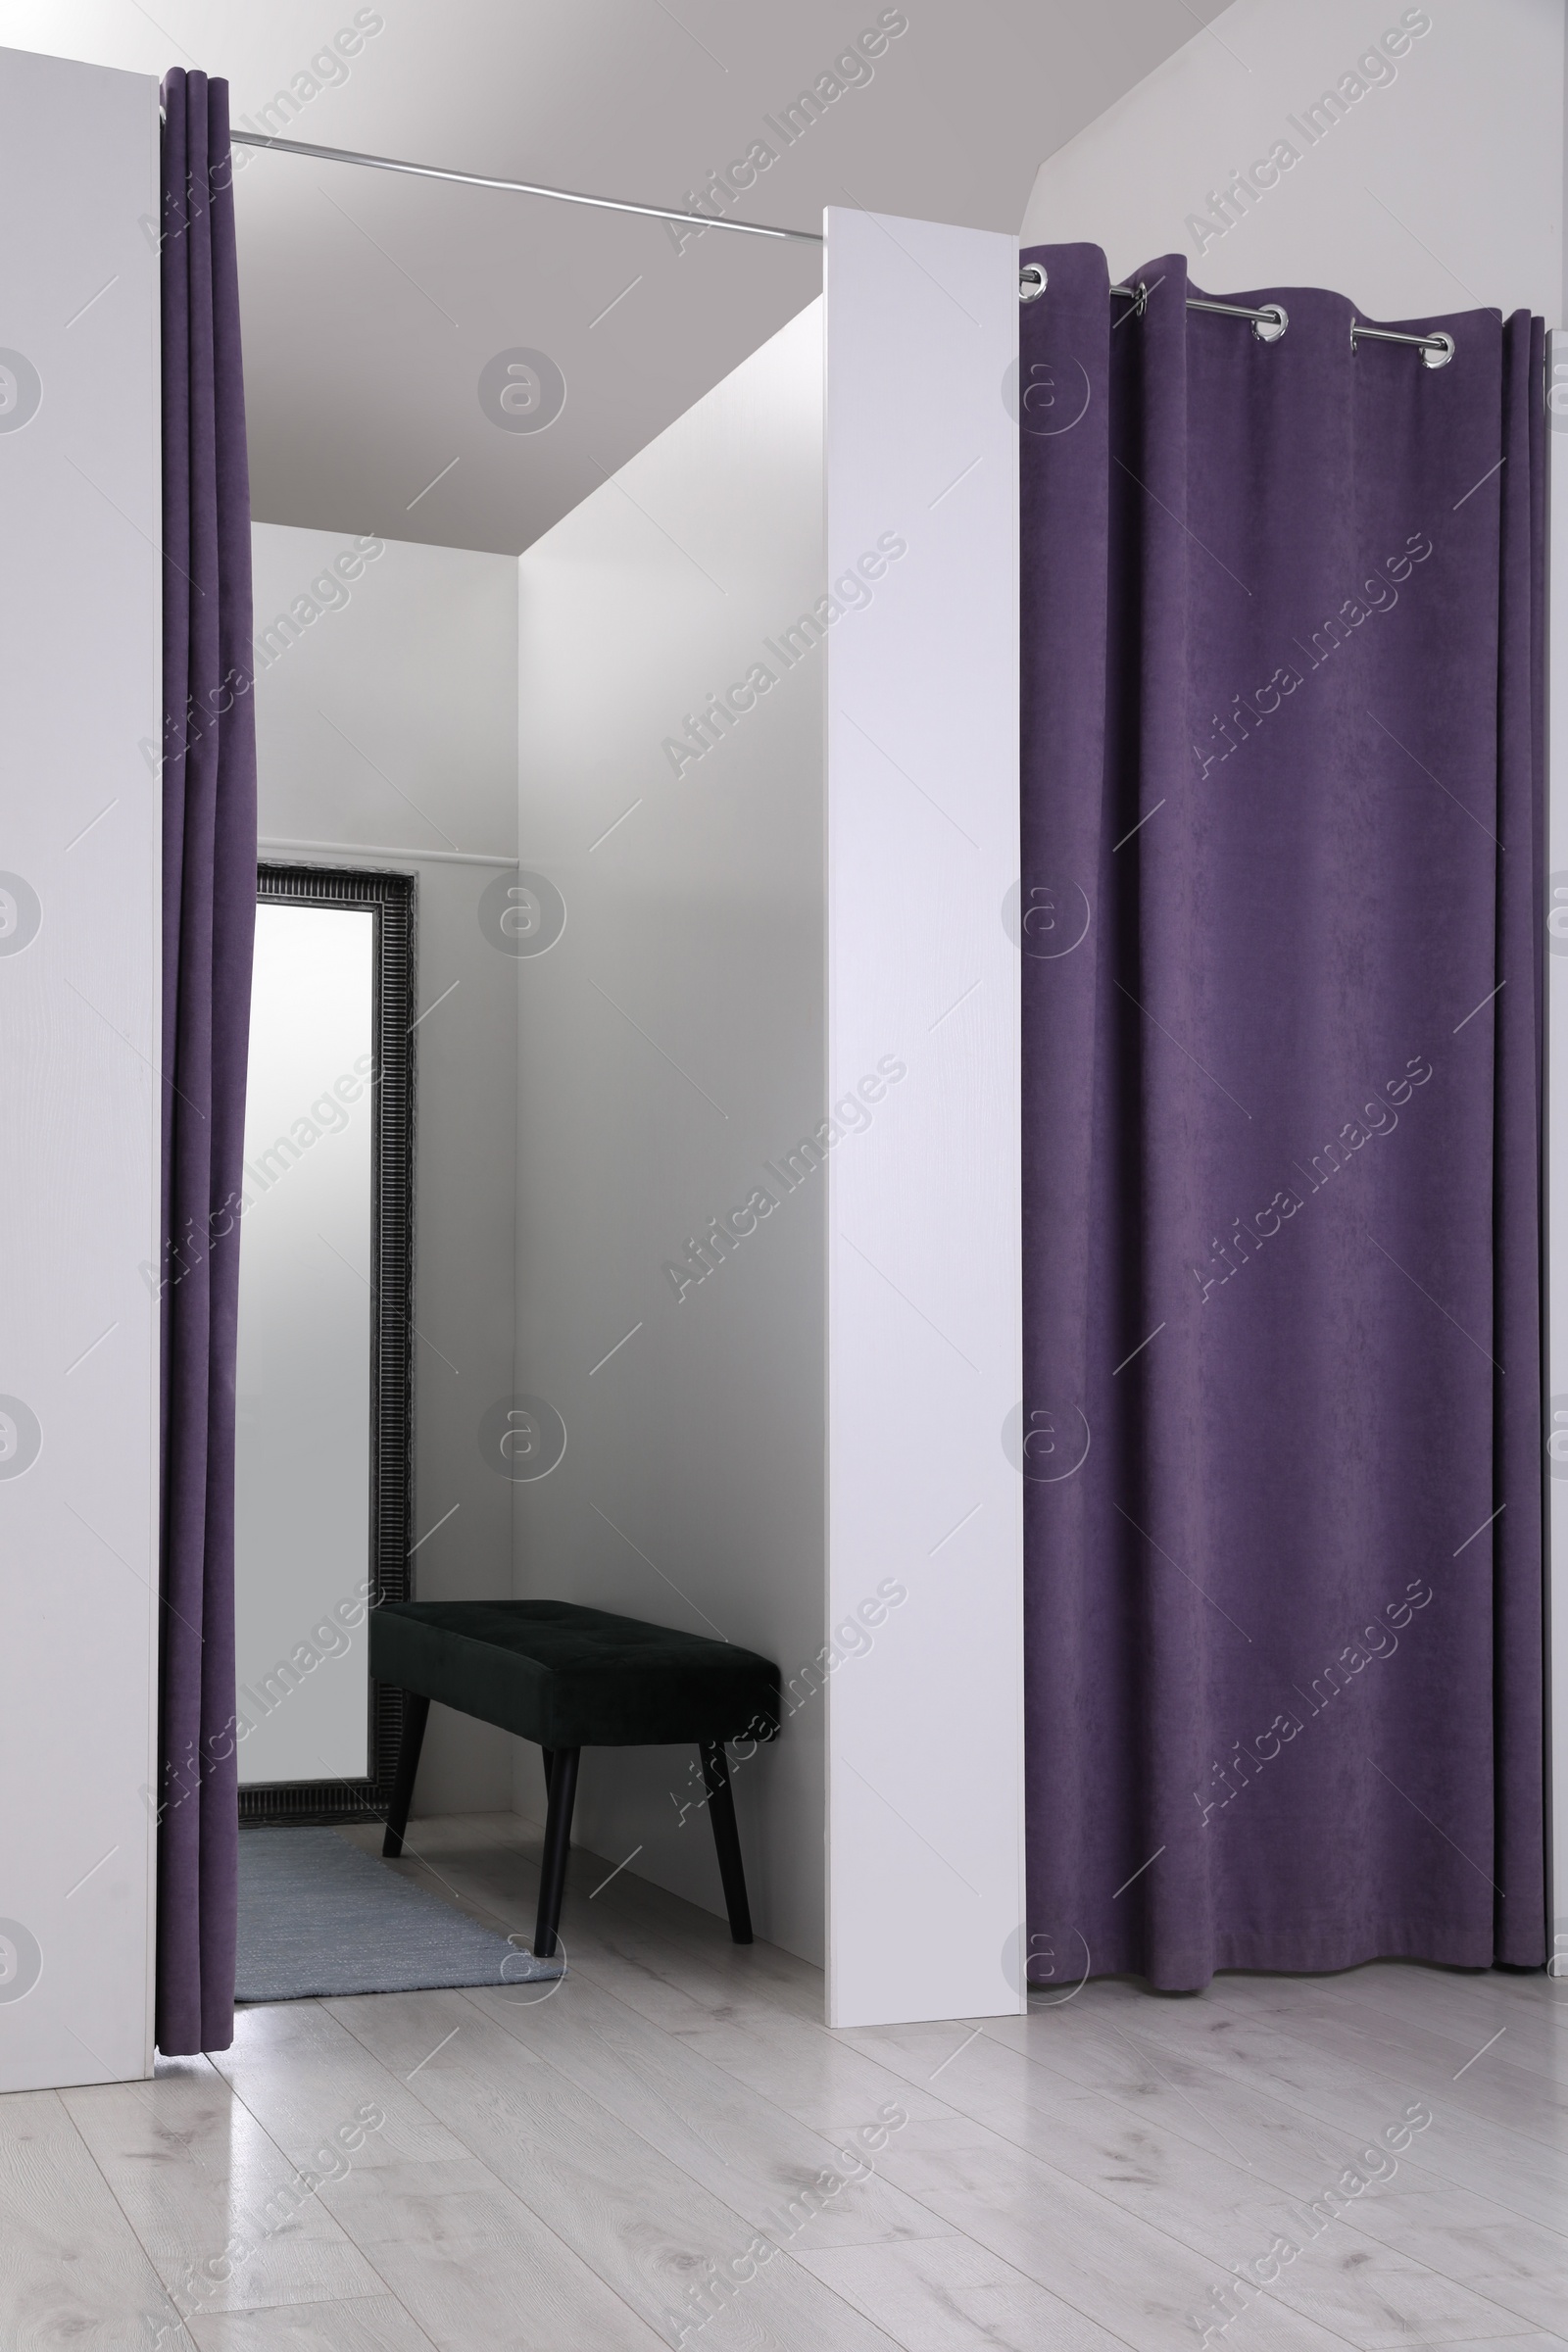 Photo of Empty dressing room in fashion store. Stylish interior